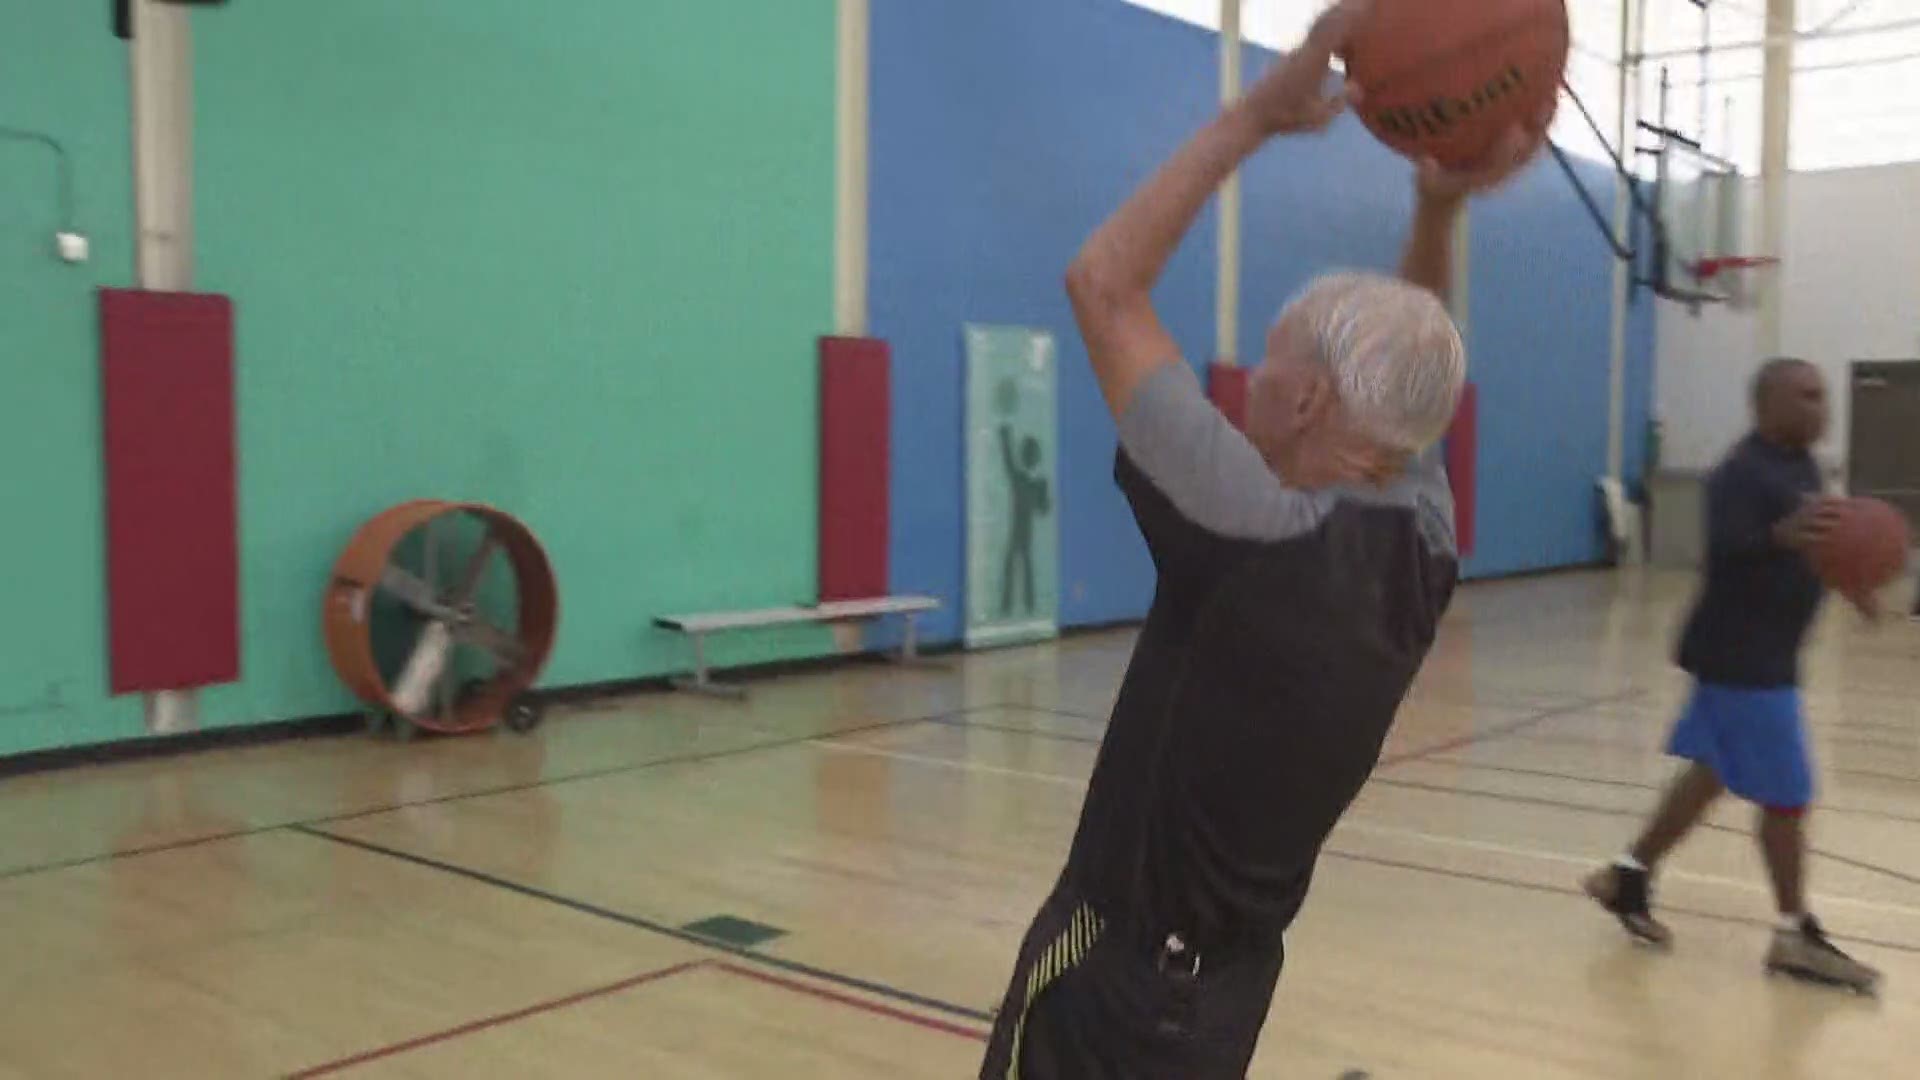 Here is something you don't see everyday: A 90-year-old hoop star.